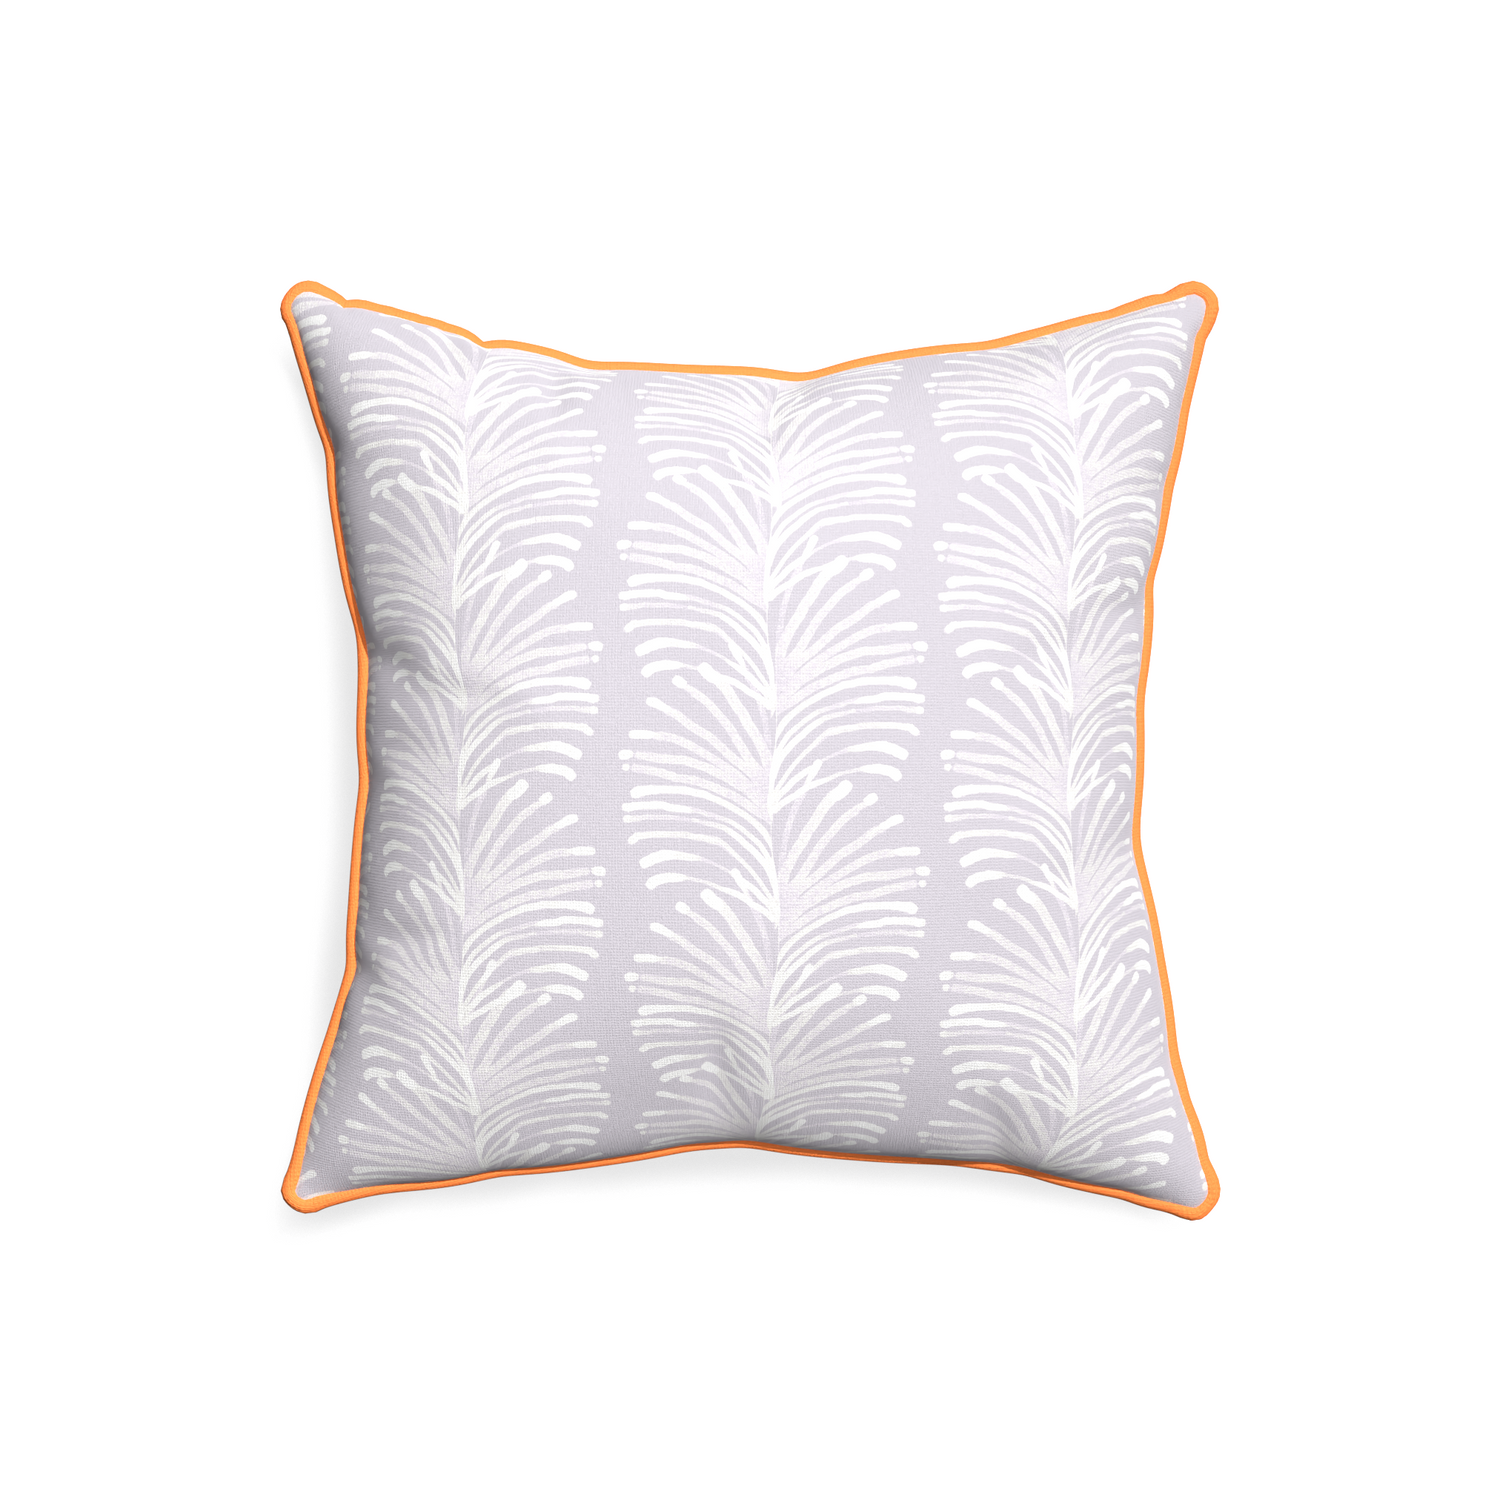 20-square emma lavender custom lavender botanical stripepillow with clementine piping on white background